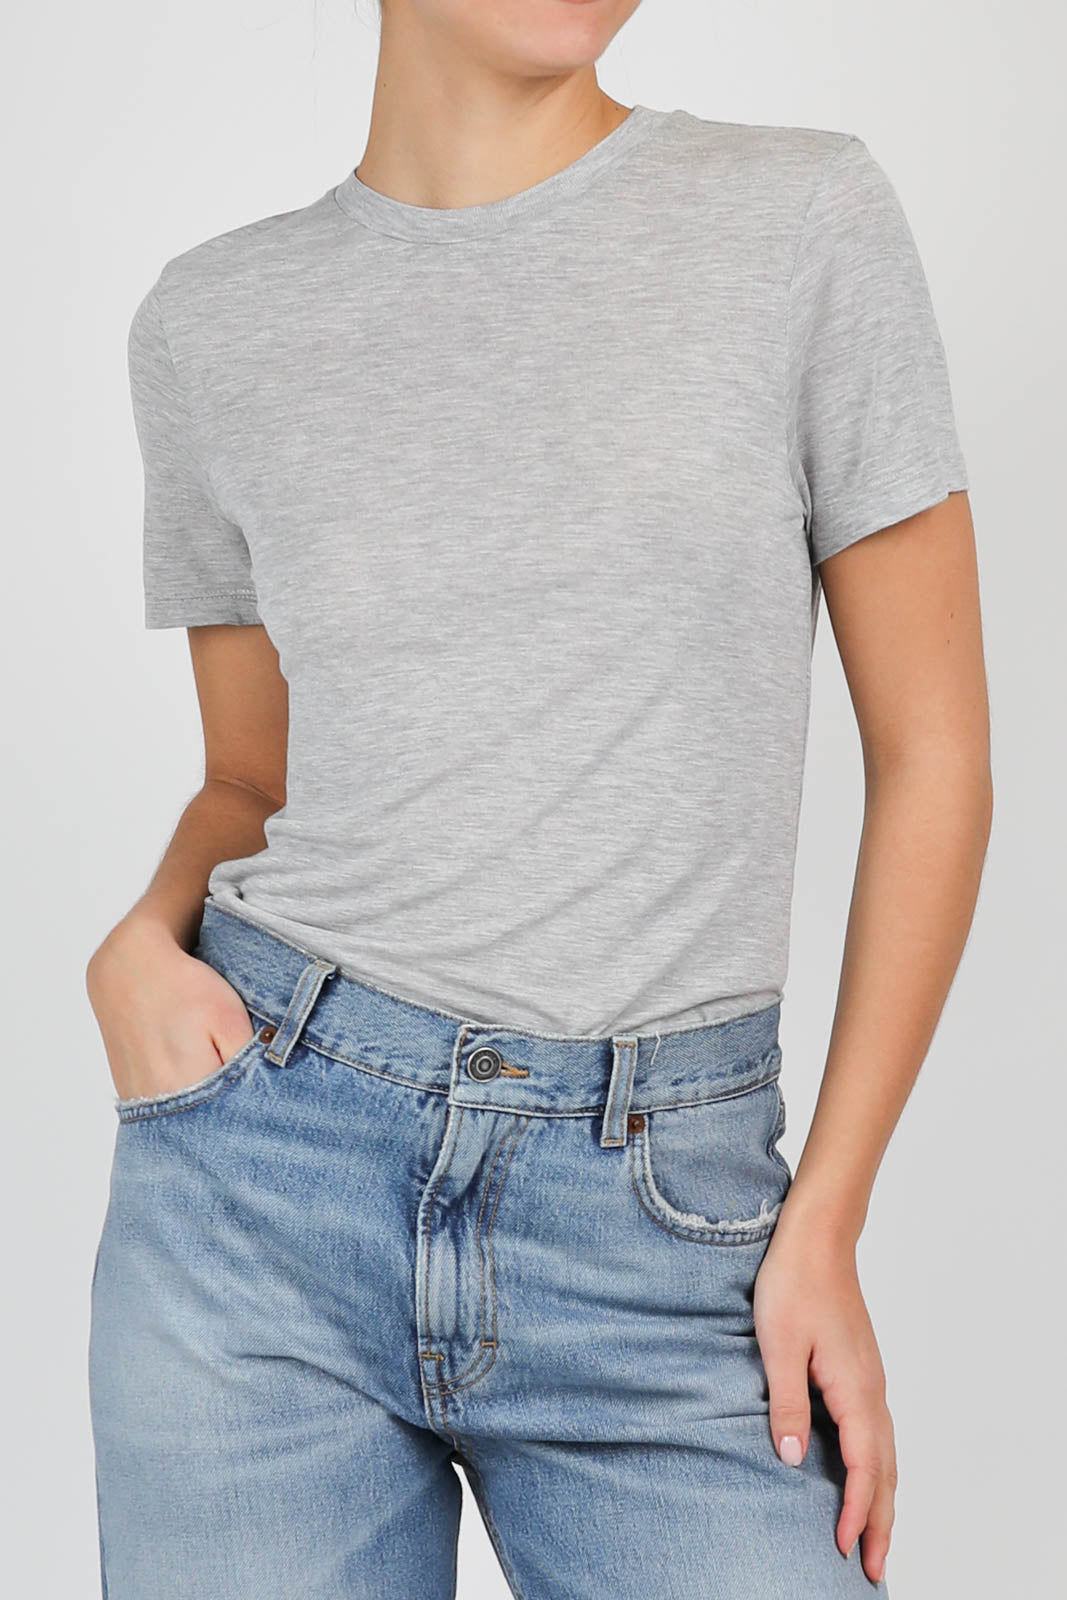 T-Shirt Annise in Heather Grey